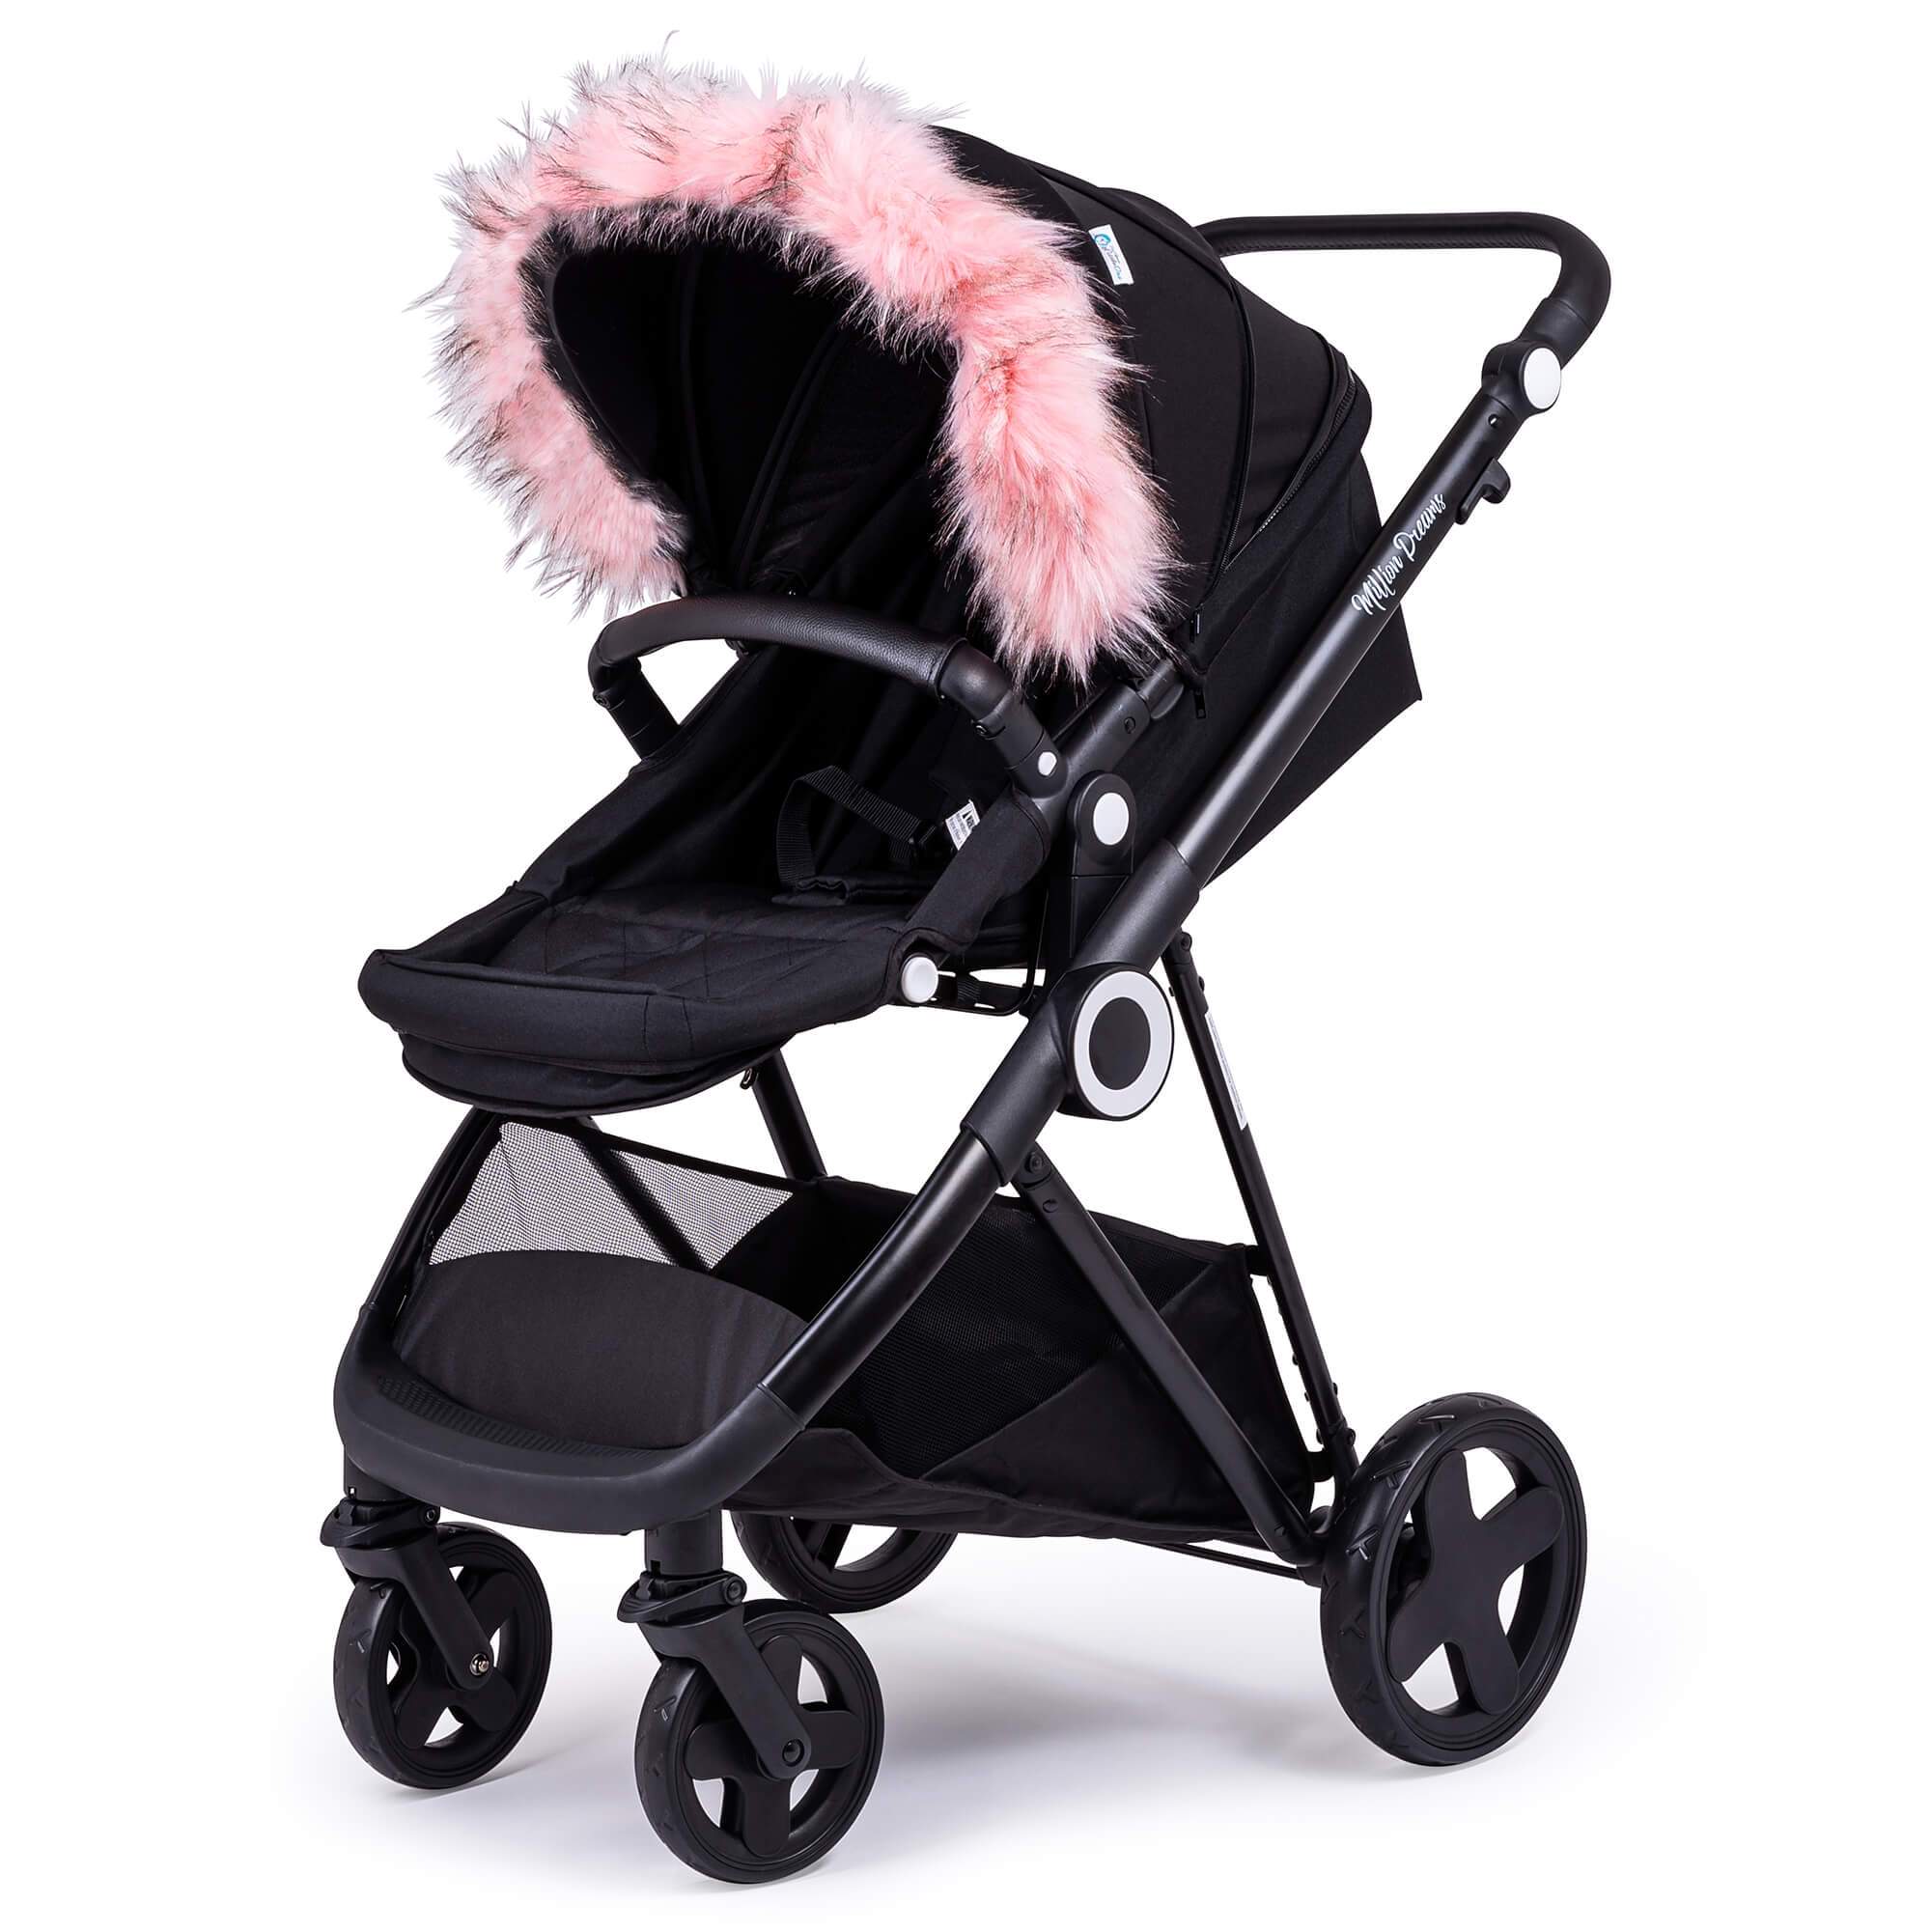 Pram Fur Hood Trim Attachment For Pushchair Compatible with Orbit Baby - Light Pink / Fits All Models | For Your Little One